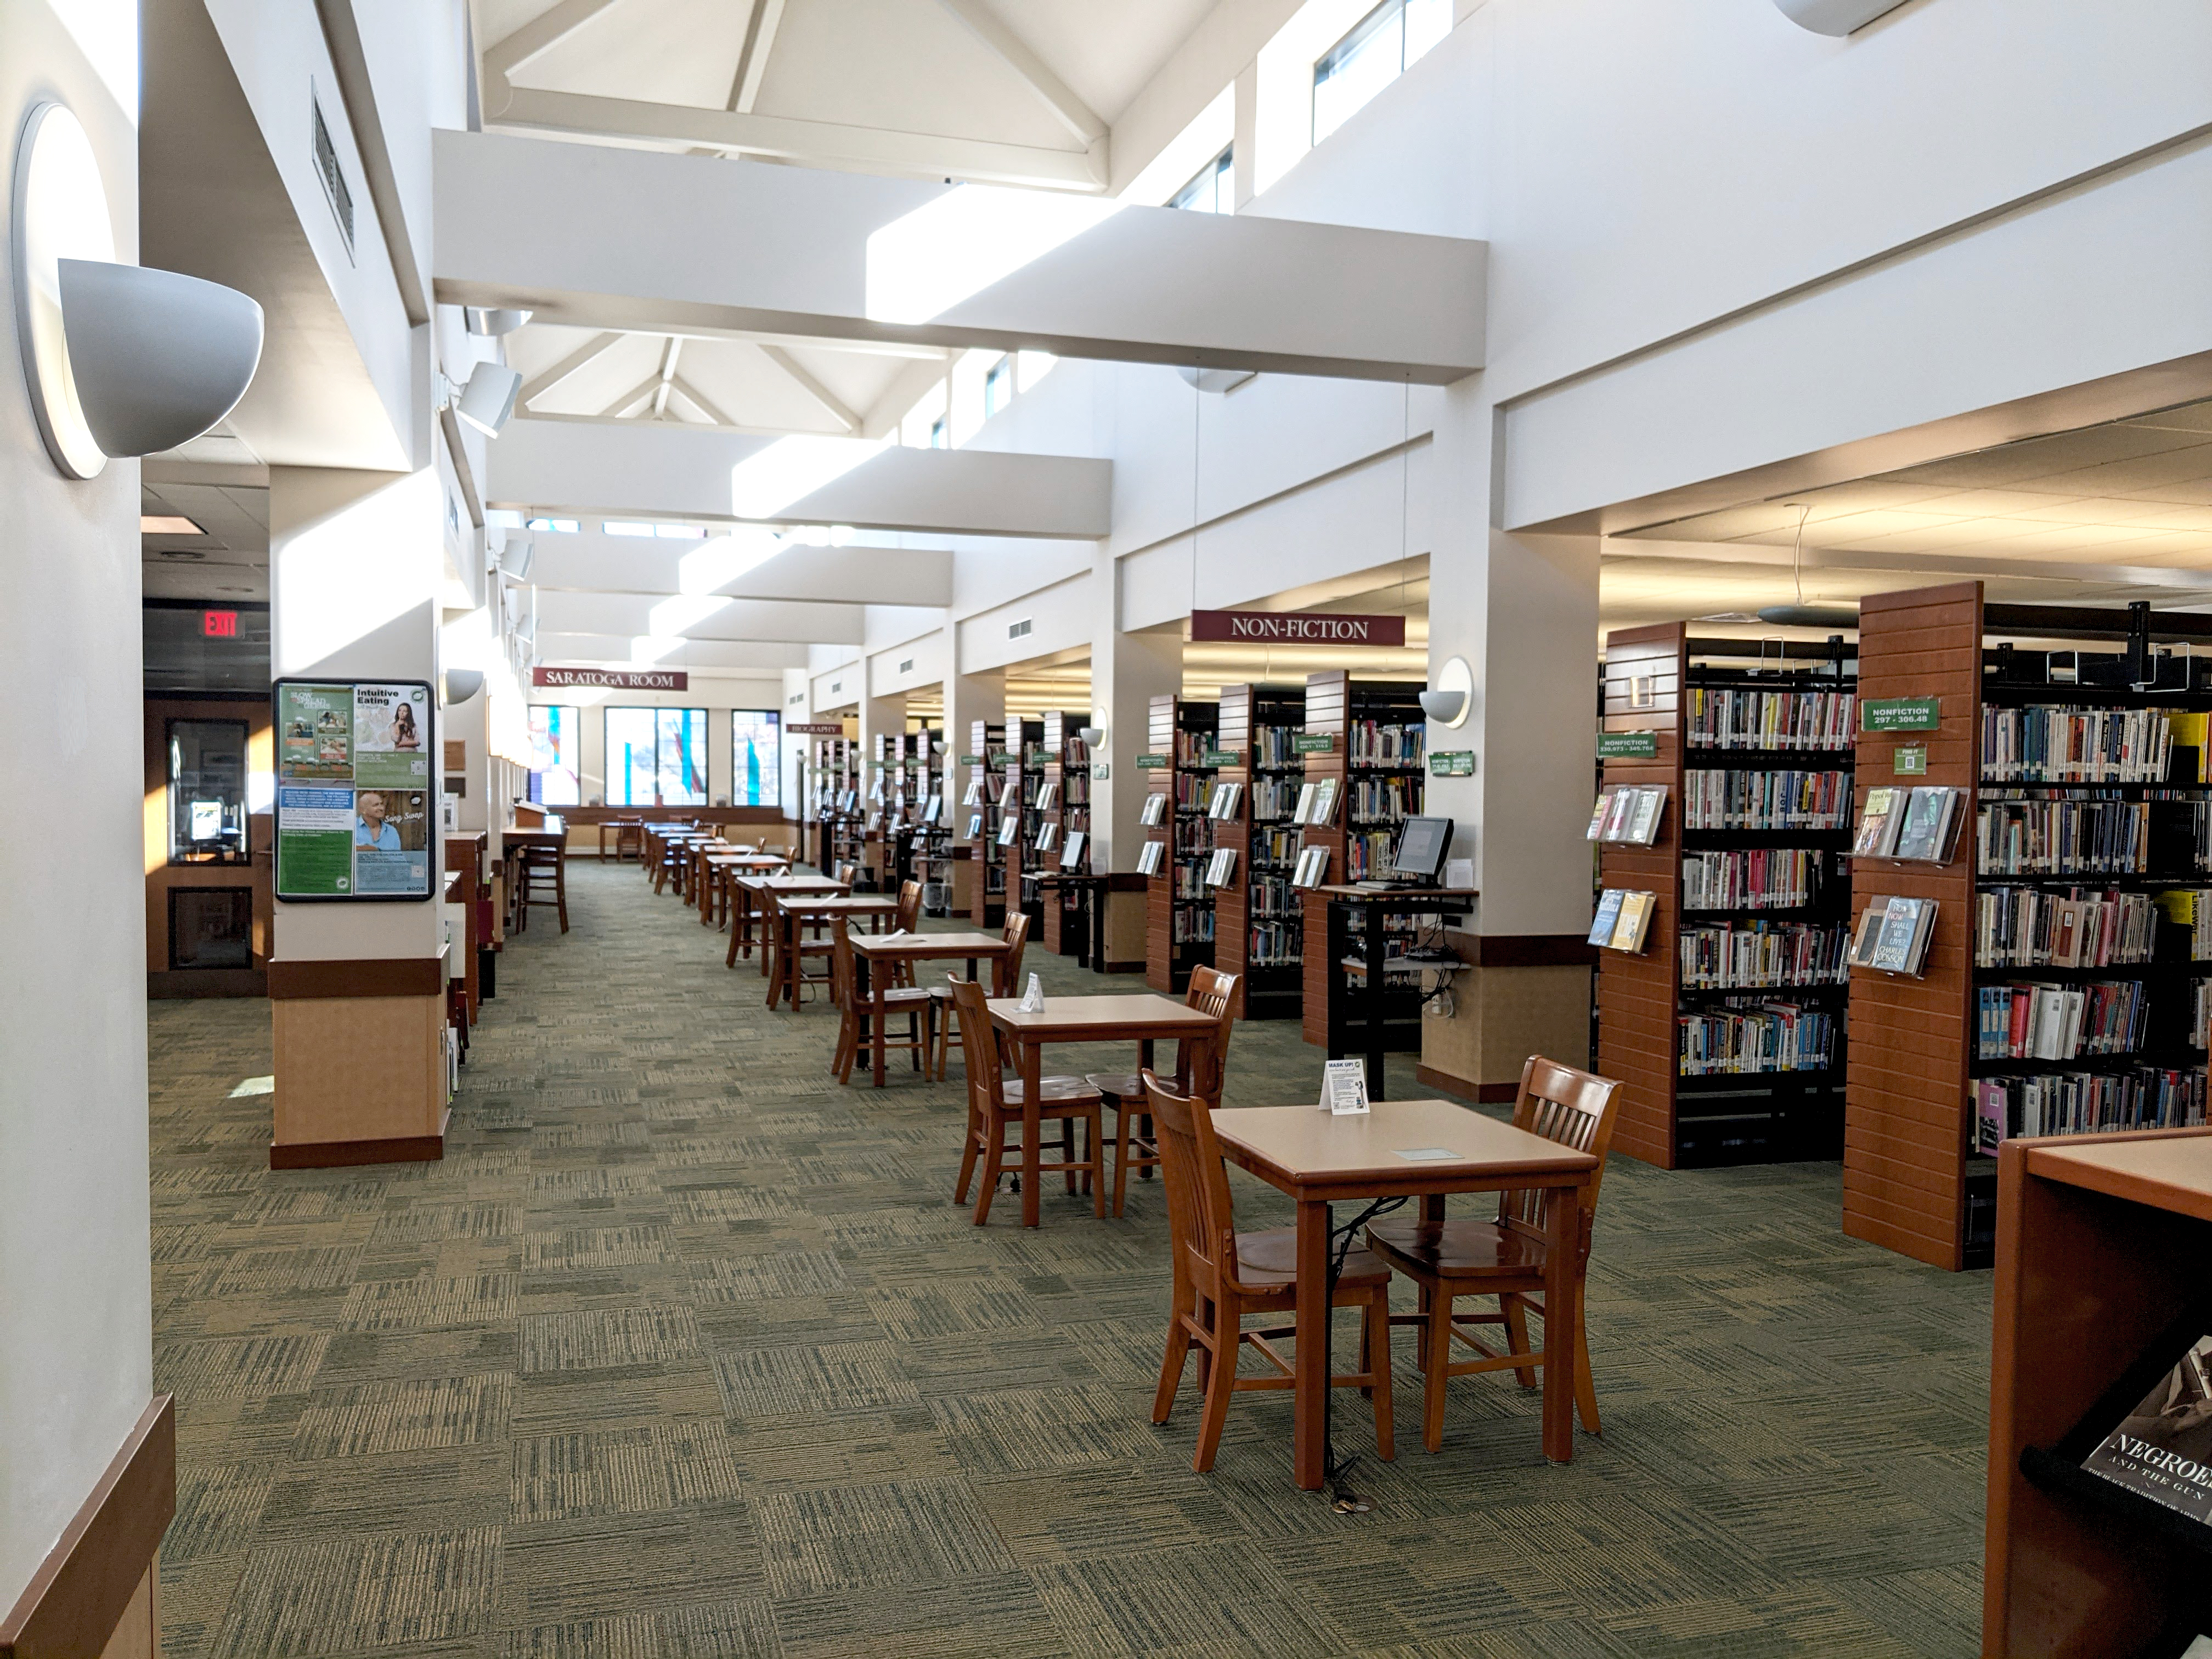 A long floorspace with many evenly spaced tables set out in front of a long row of book shelving and high, open ceilings with natural light.